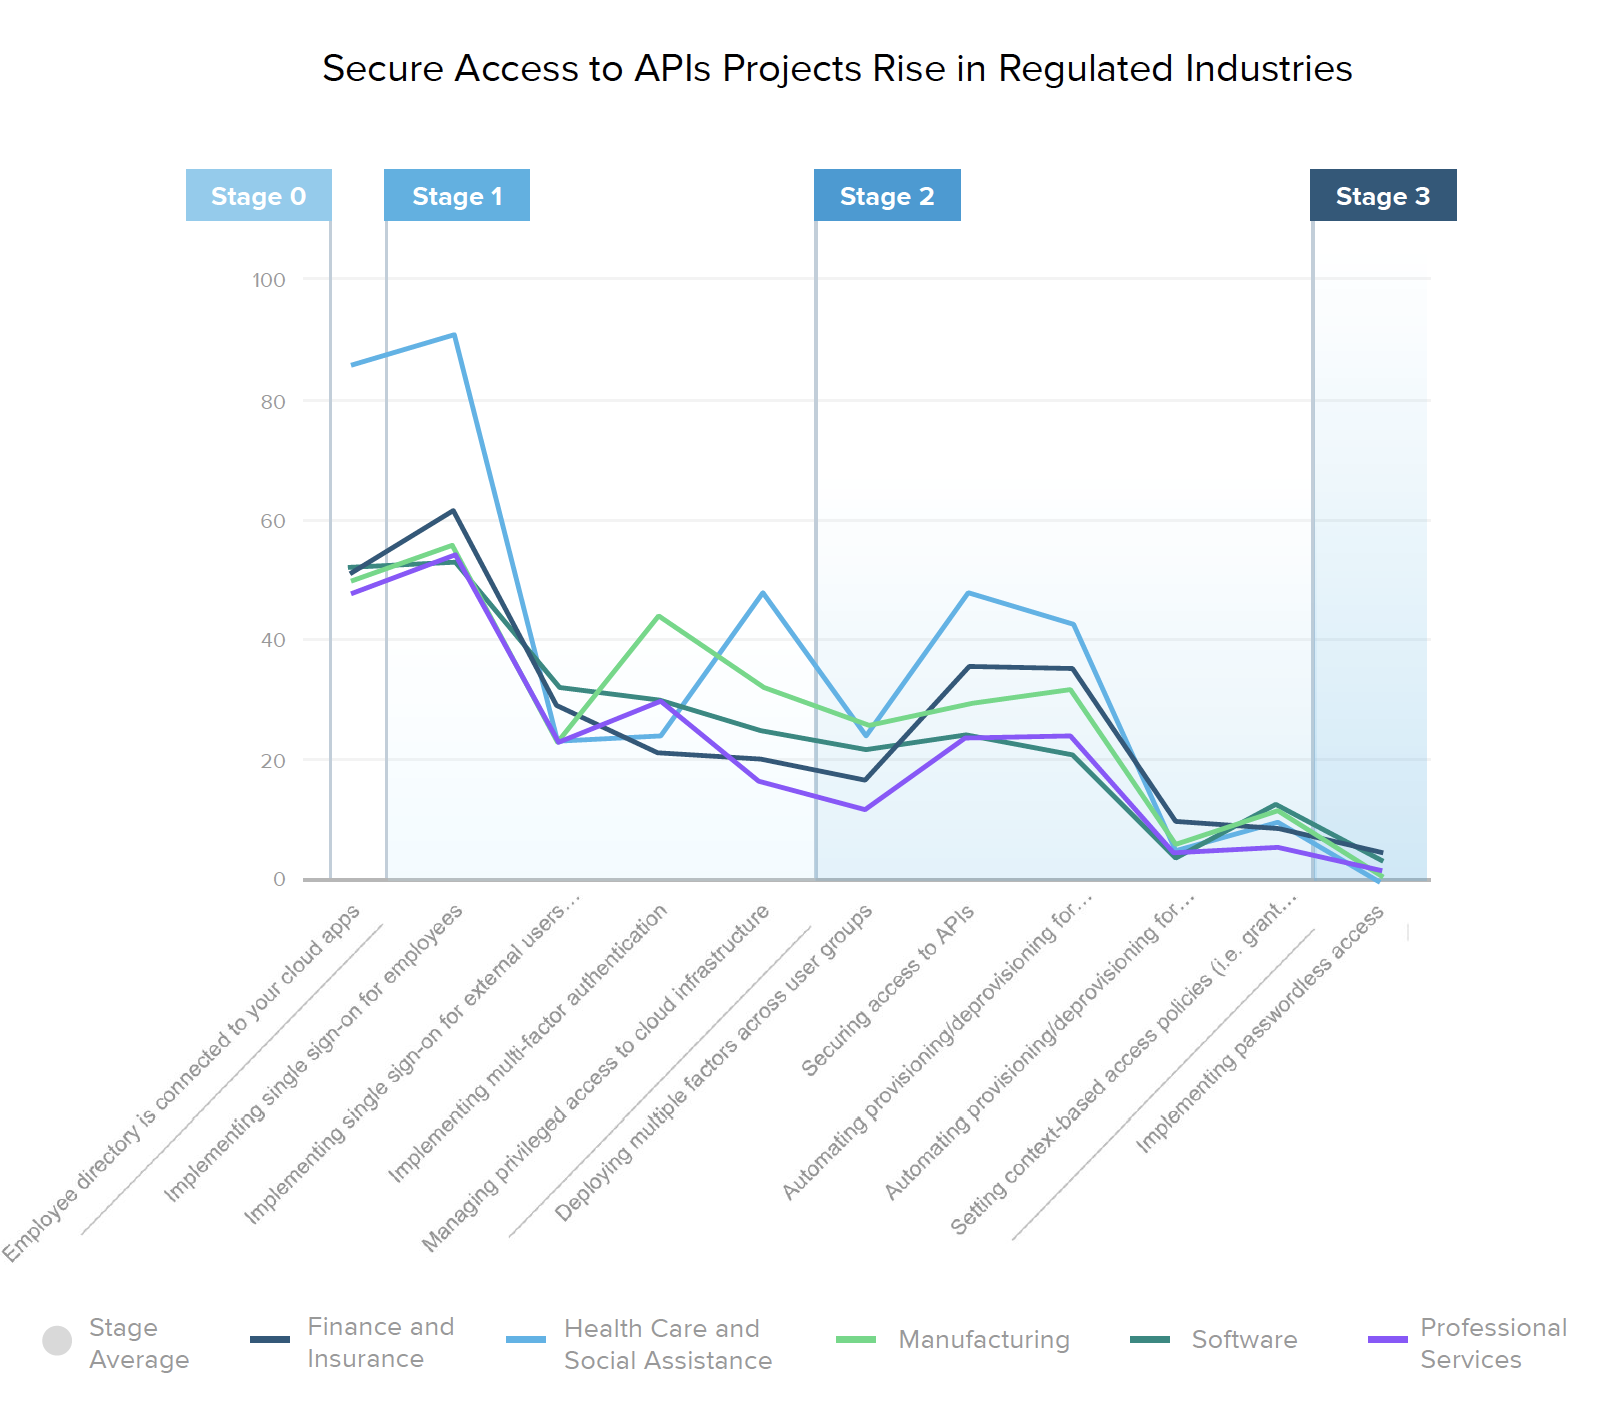 Secure Access to APIs Projects Rise in Regulated Industries